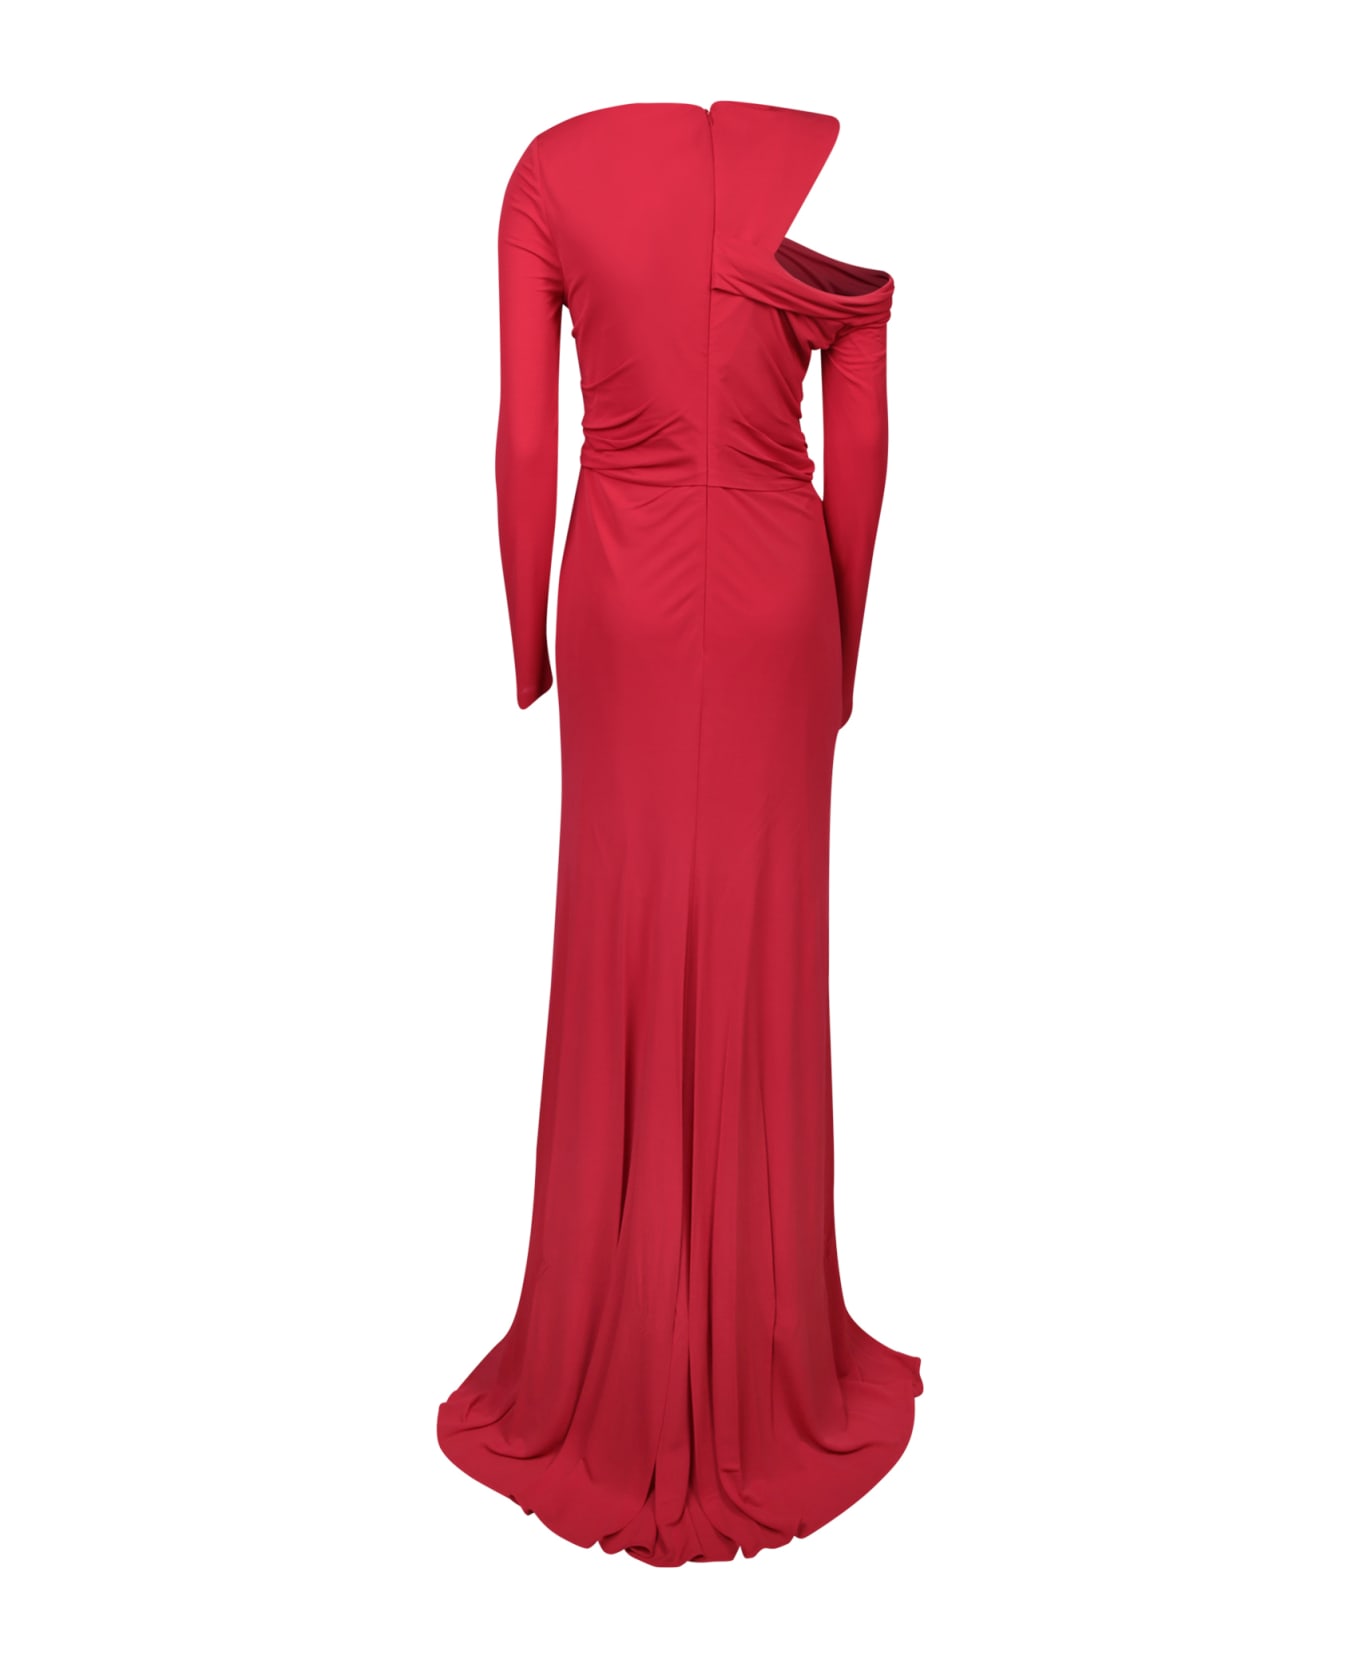 Alexander McQueen Ruched Red Dress - Red ワンピース＆ドレス